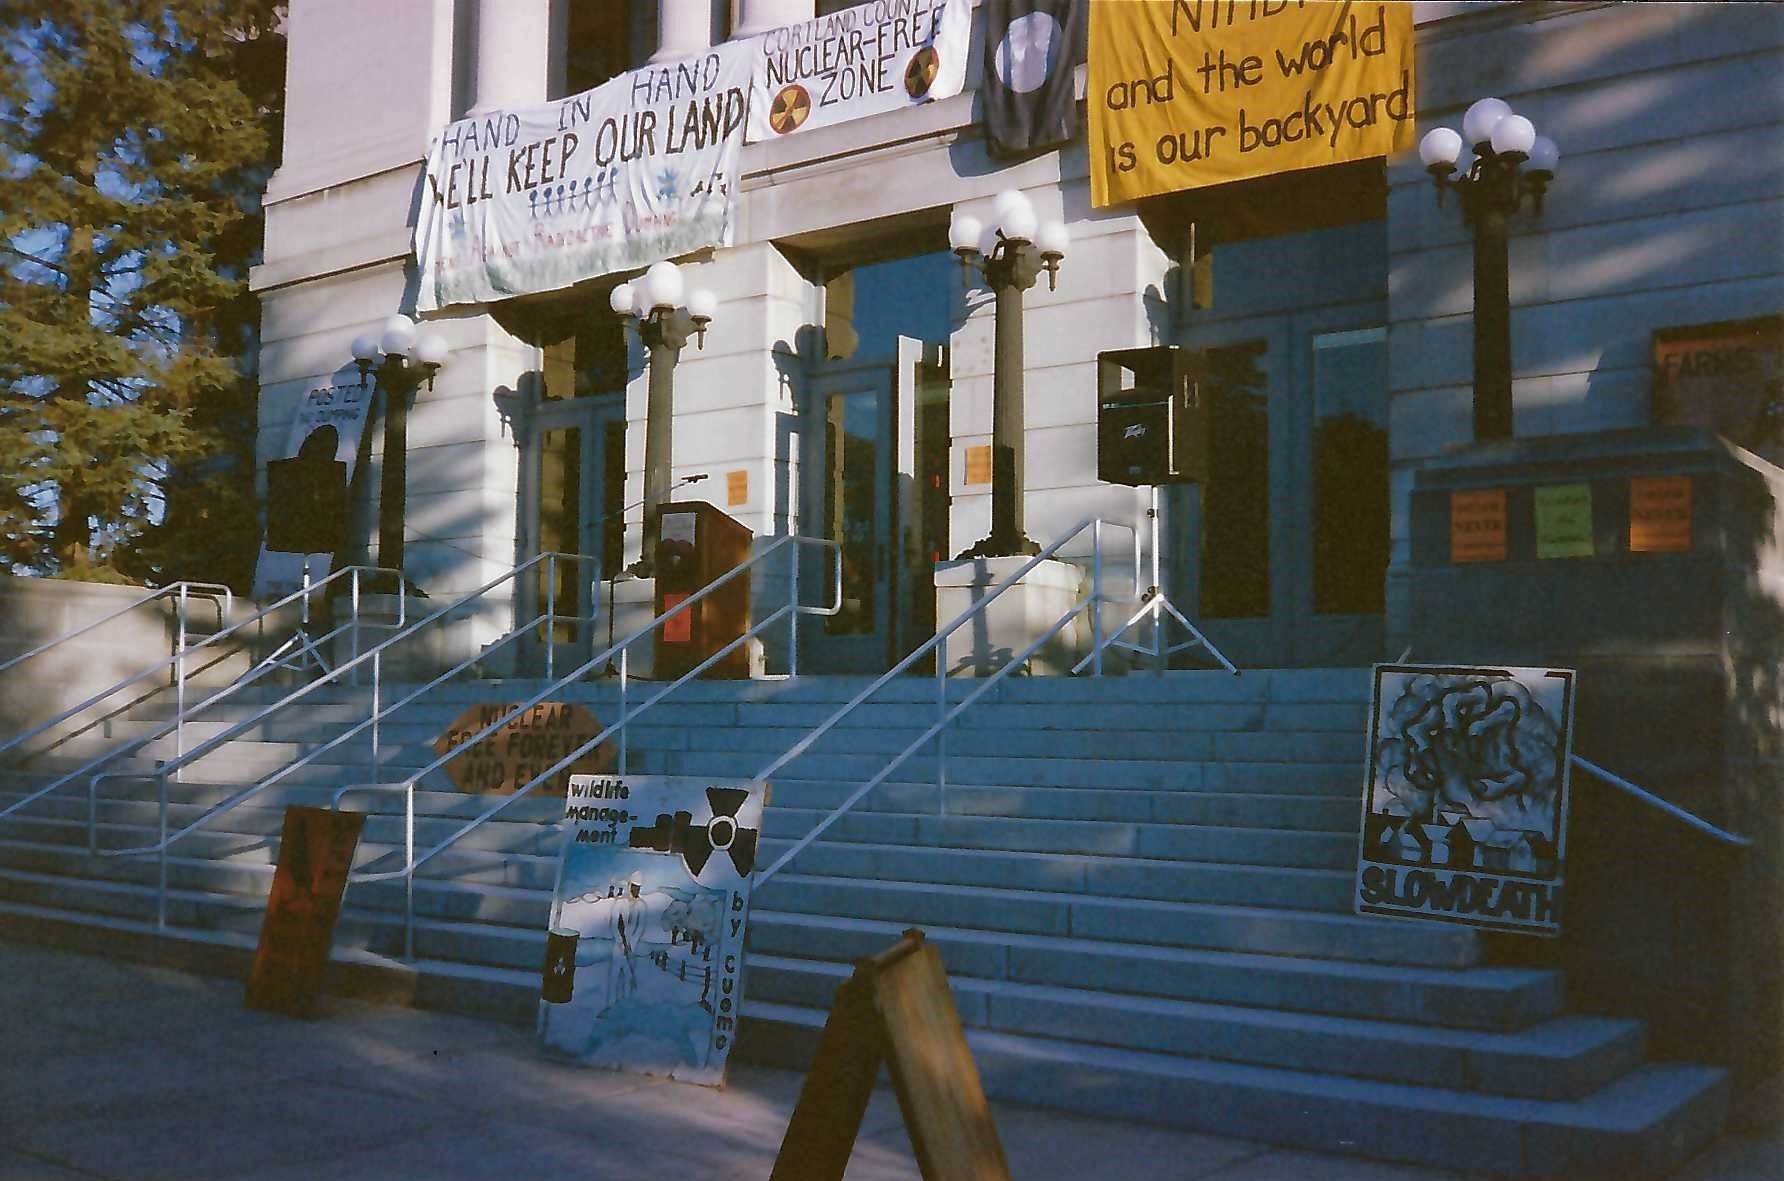 Cortland County Courthouse steps with signs and posters featuring anti-radioactive waste dump slogans